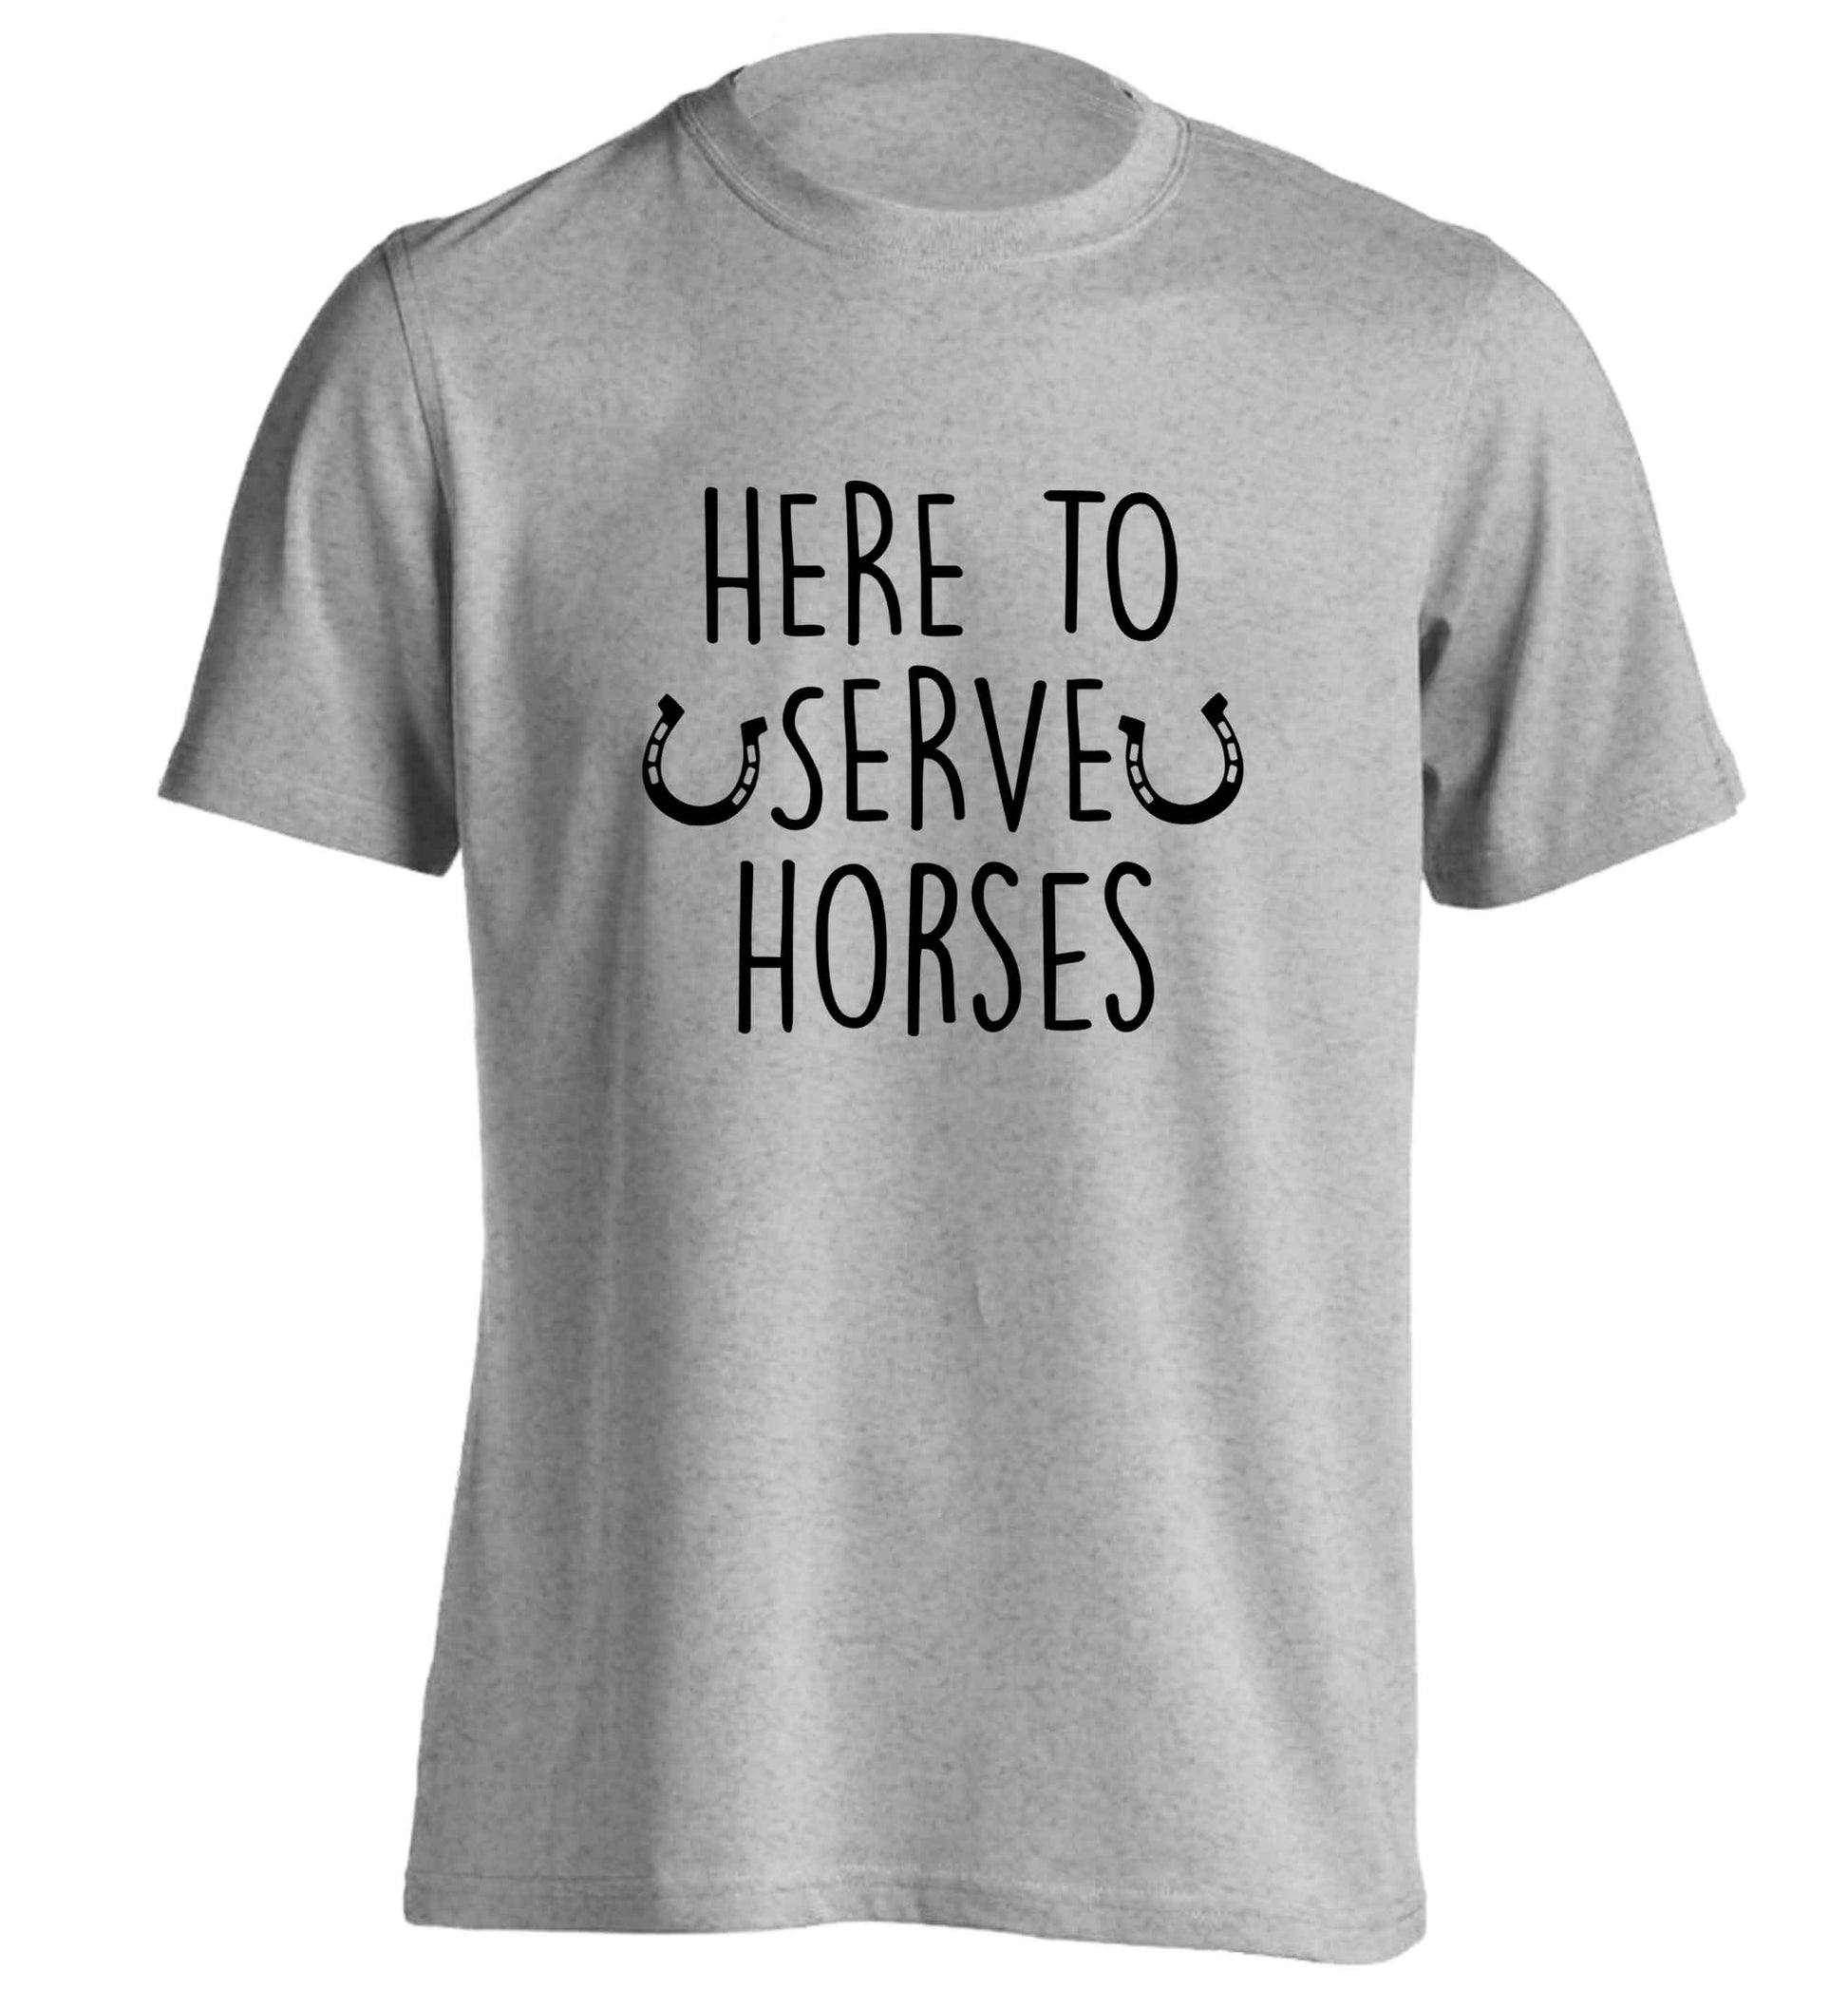 Here to serve horses adults unisex grey Tshirt 2XL